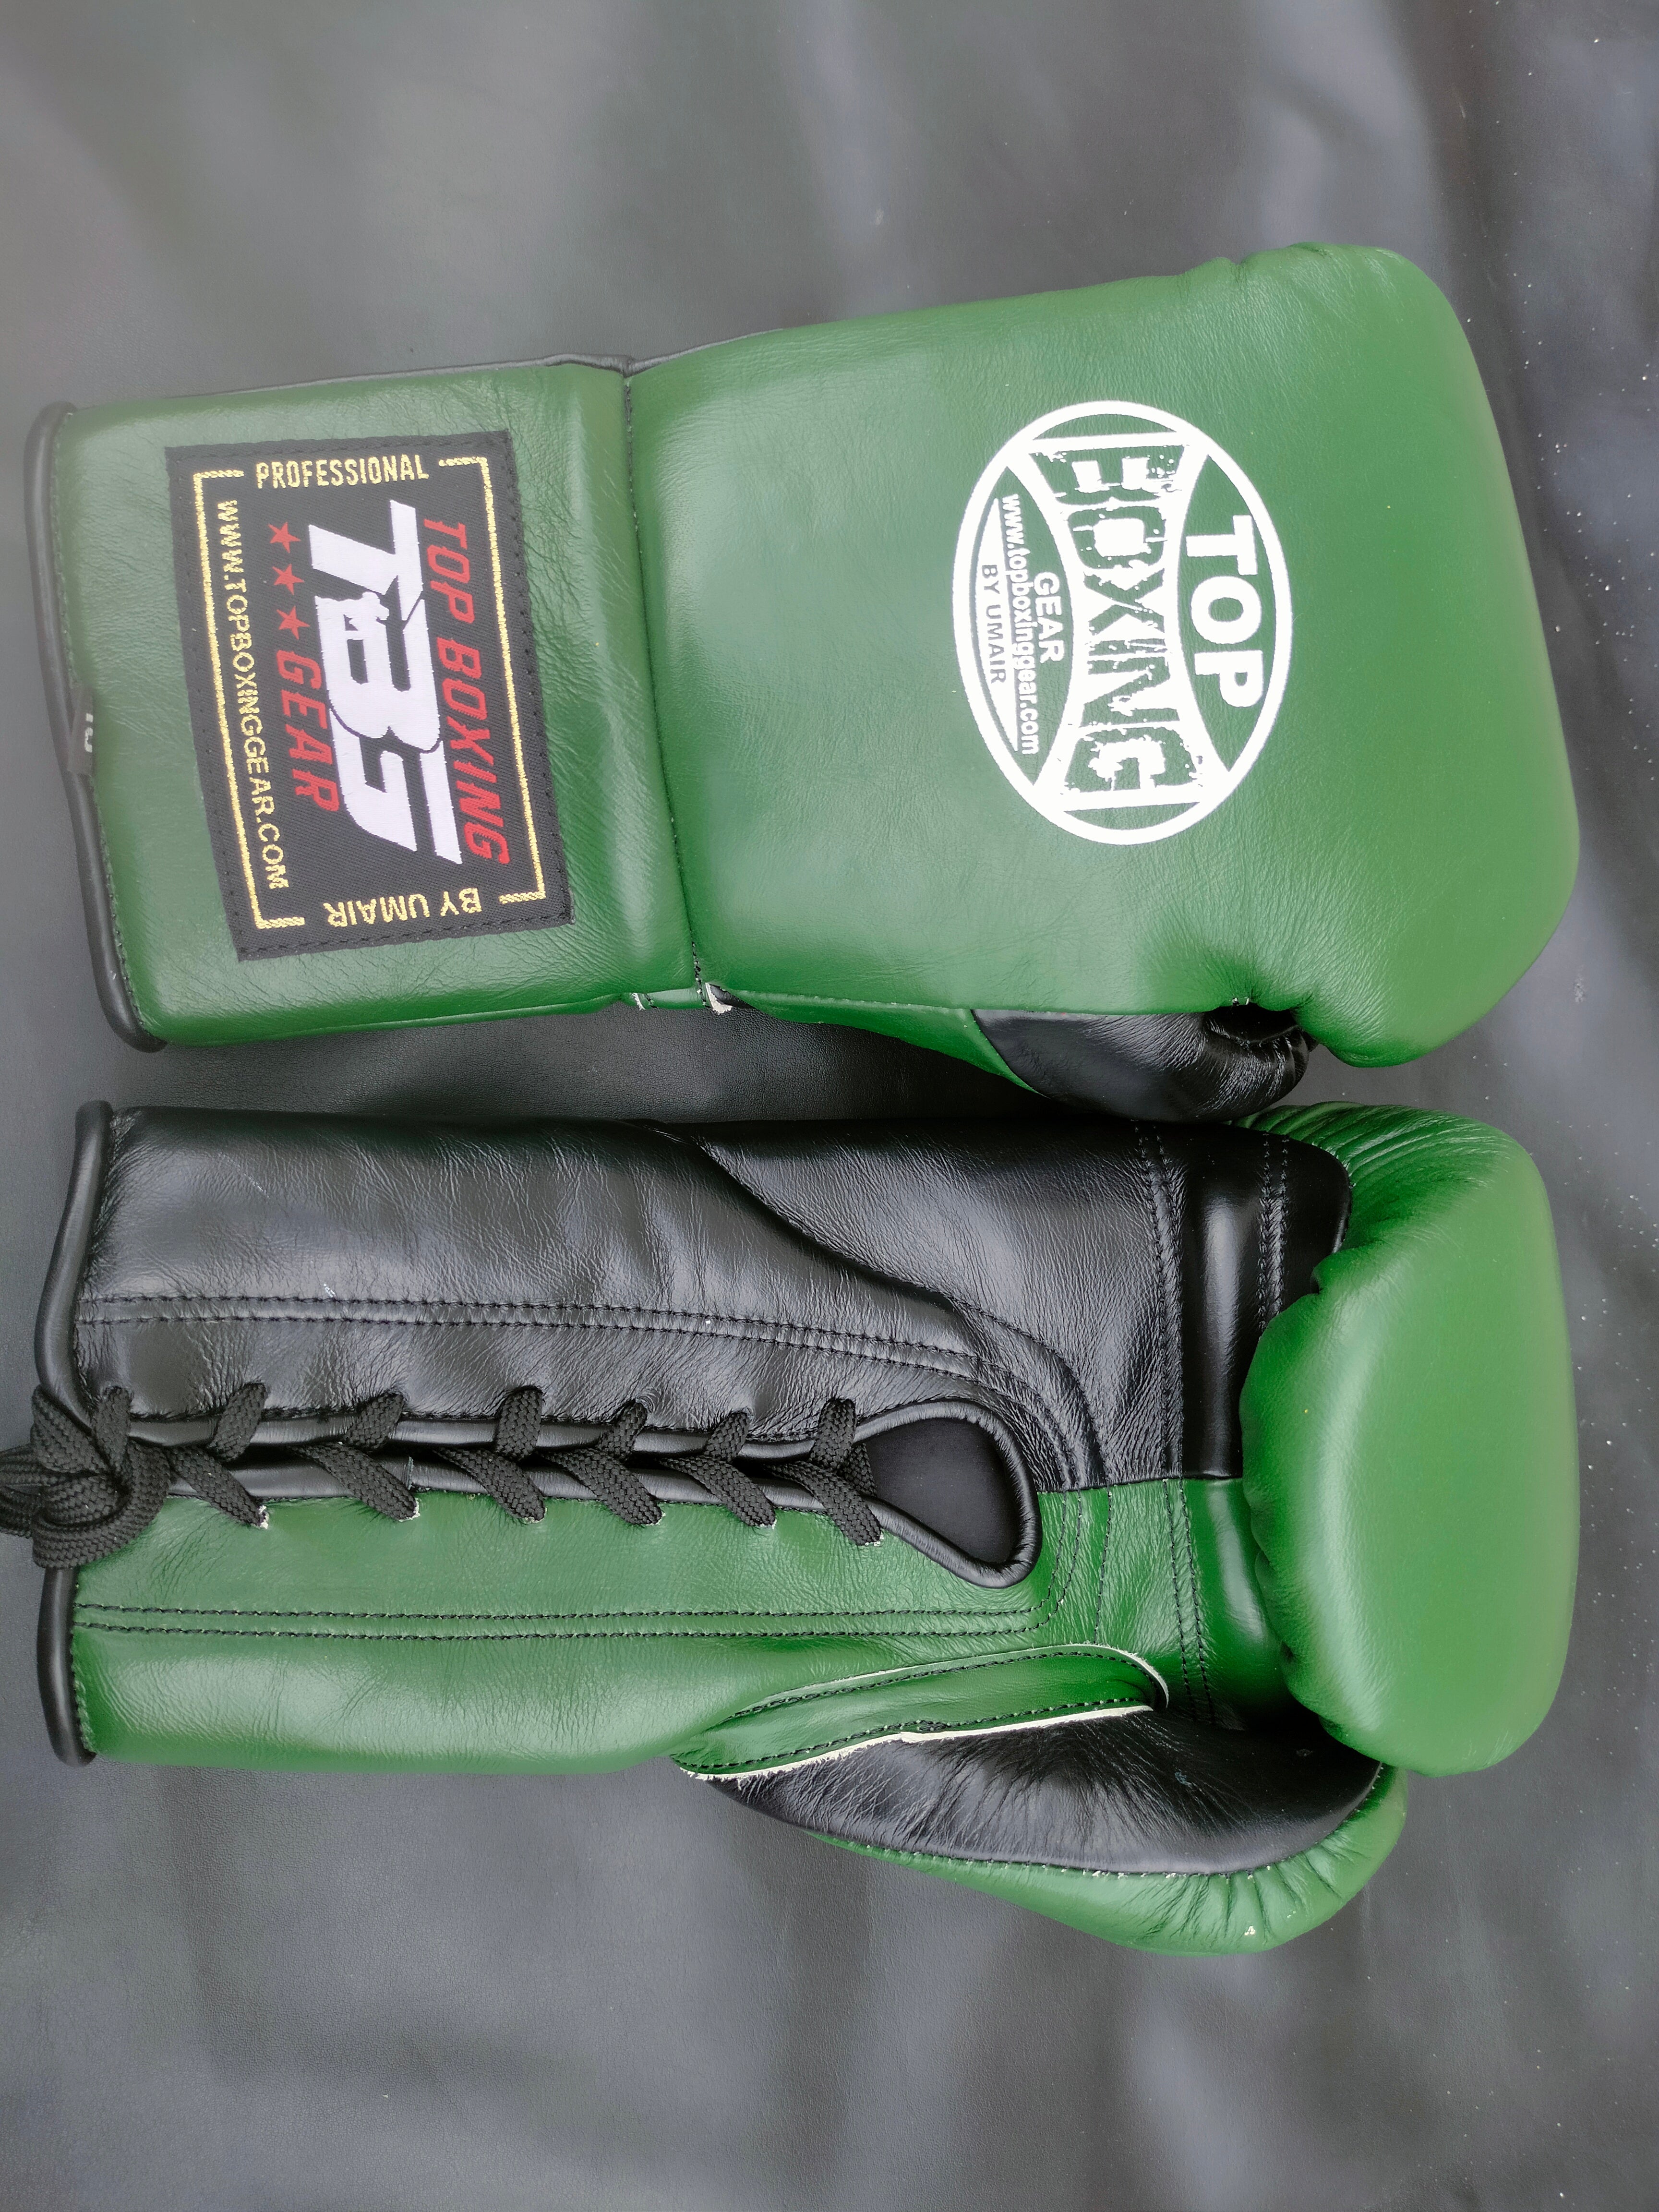 Top Boxing Fighter Gear-Leather